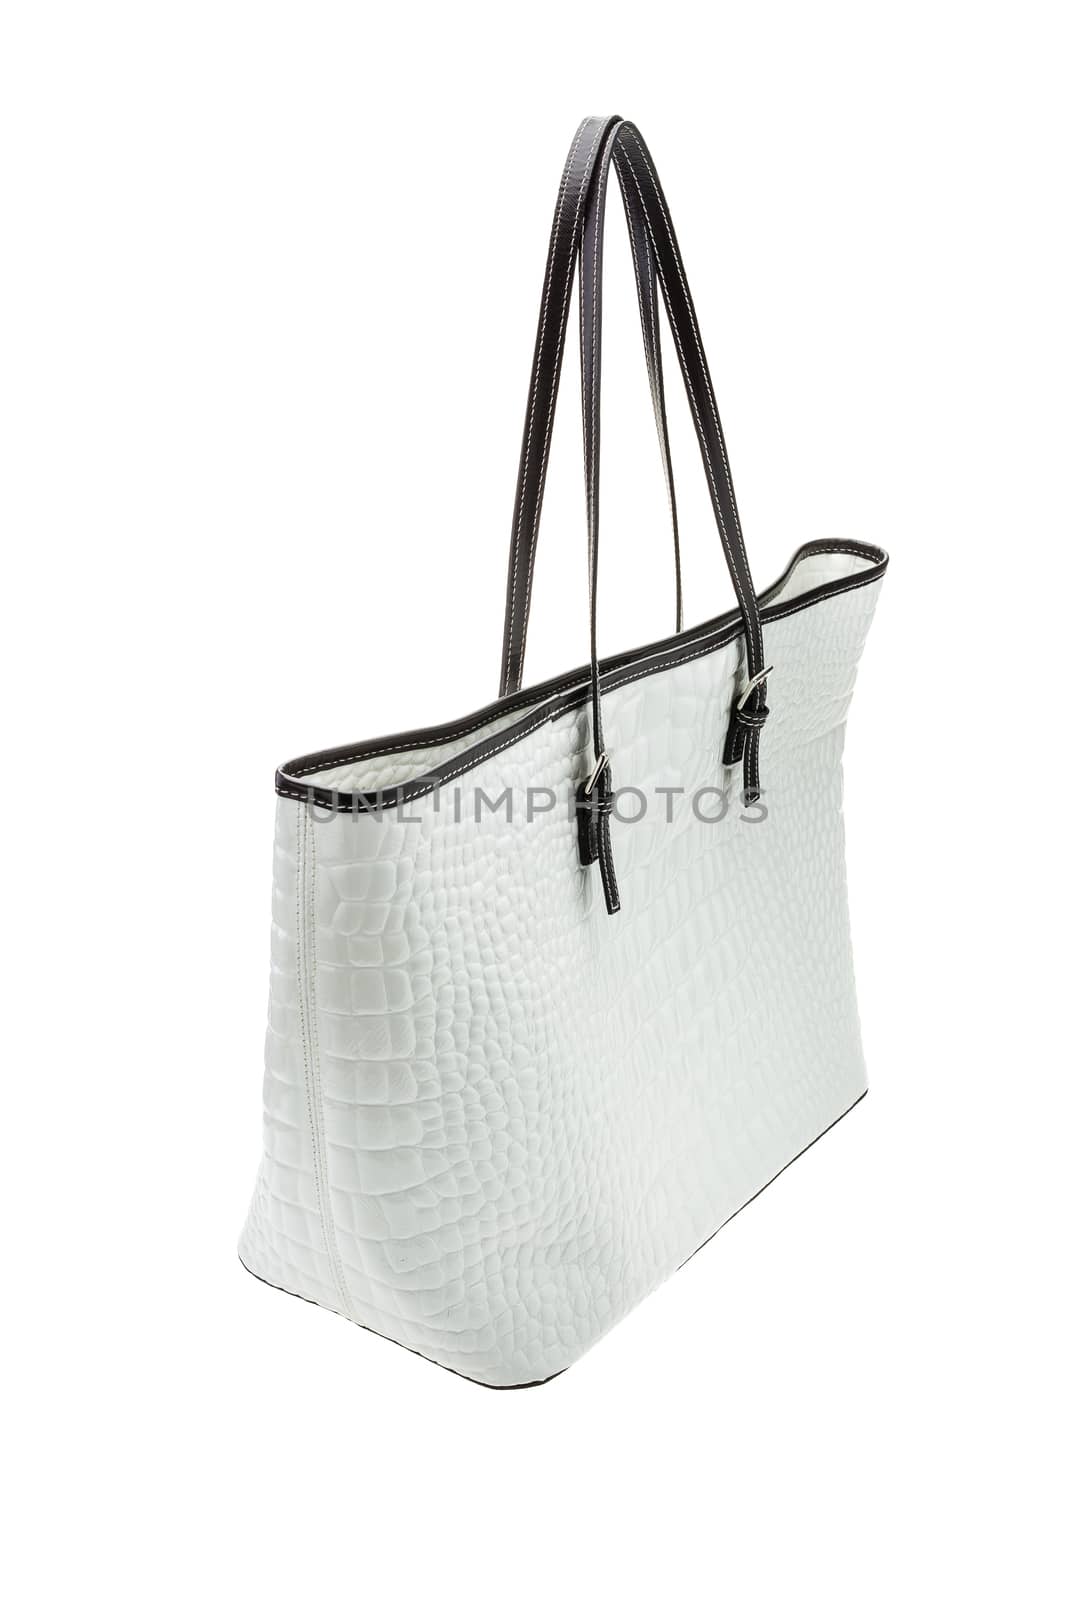 New white womens bag with black strip, isolated on white background.